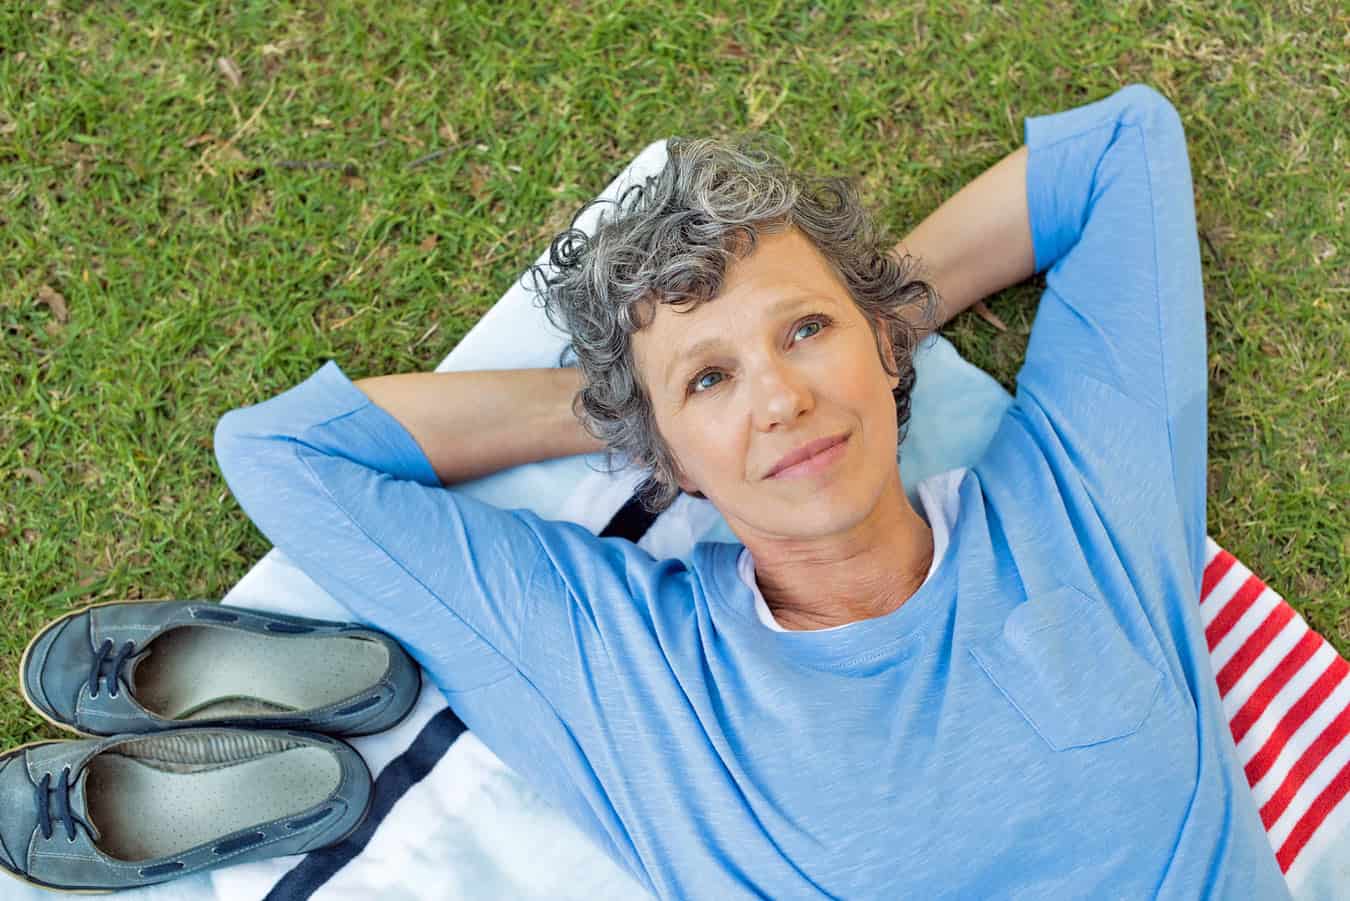 woman-gazing-at-sky-on-back-on-grass-thinking-about-what-to-do-with-her-vacation-ownership-during-picnic